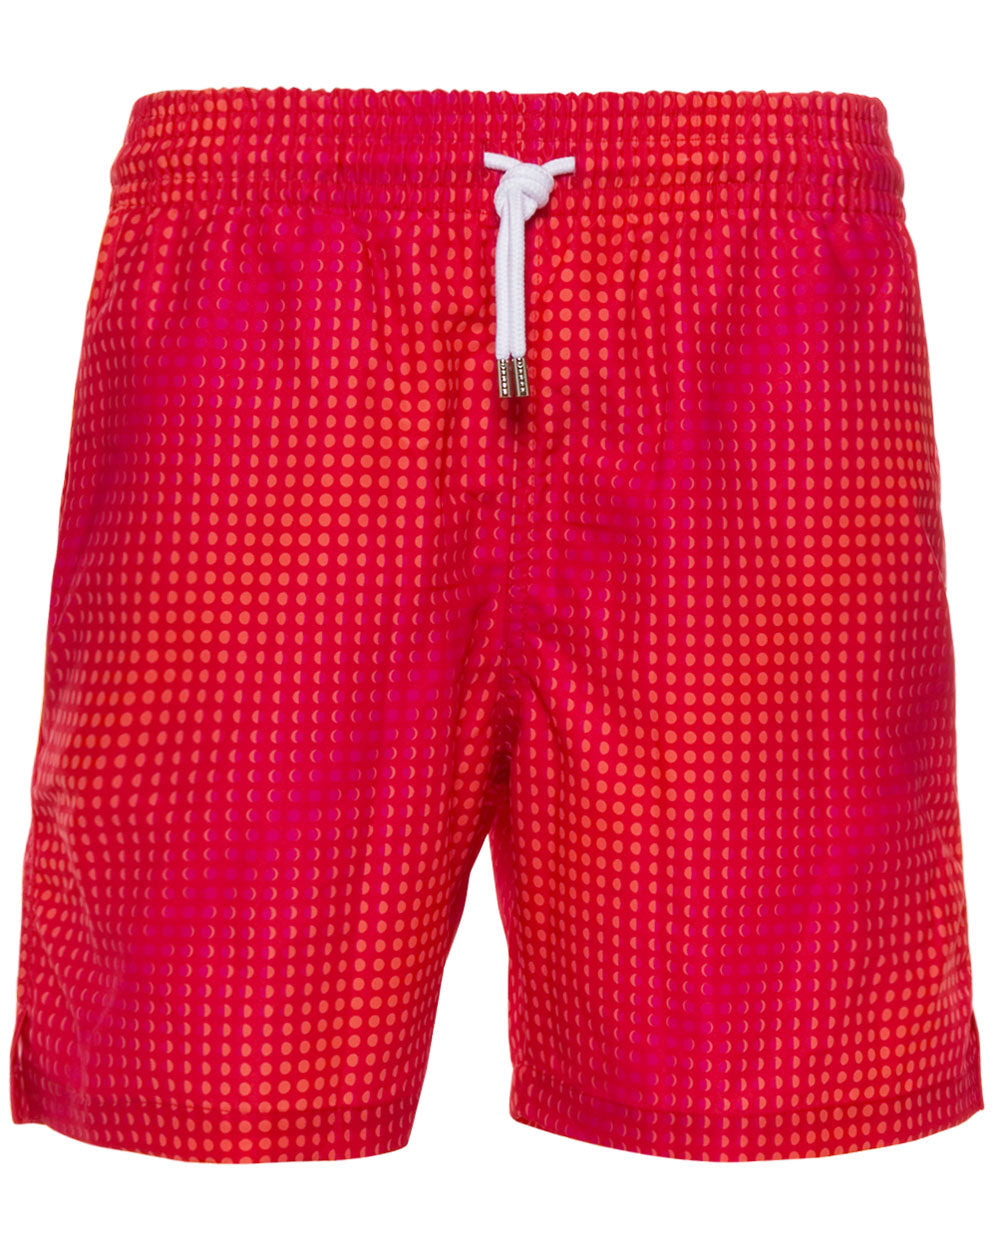 Red Dotted 7 Inch Swim Short